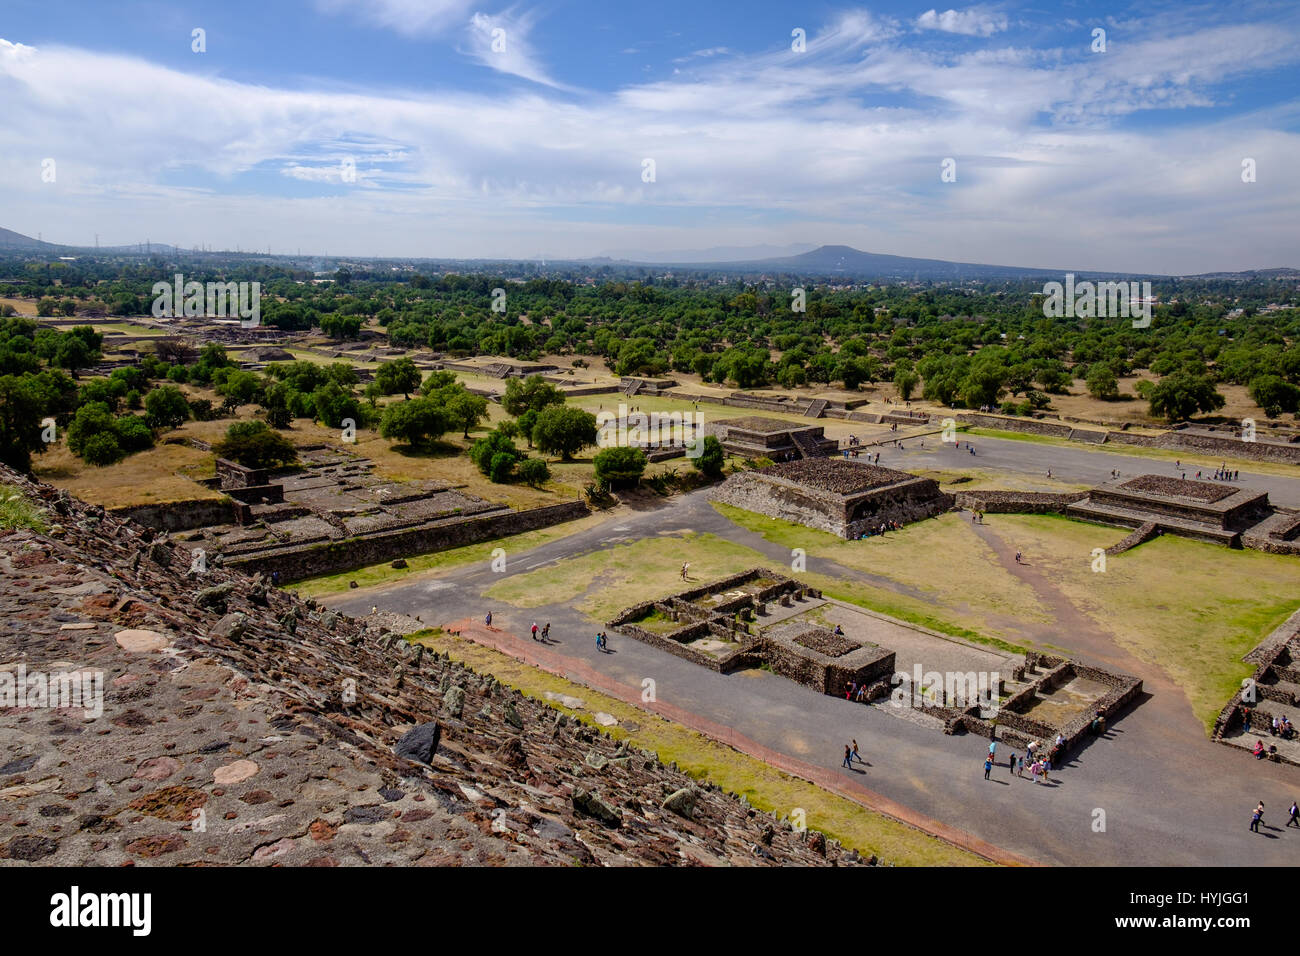 Scenic view of Avenue of dead in Teotihuacan, Mayan pyramids near Mexico city, Mexico Stock Photo